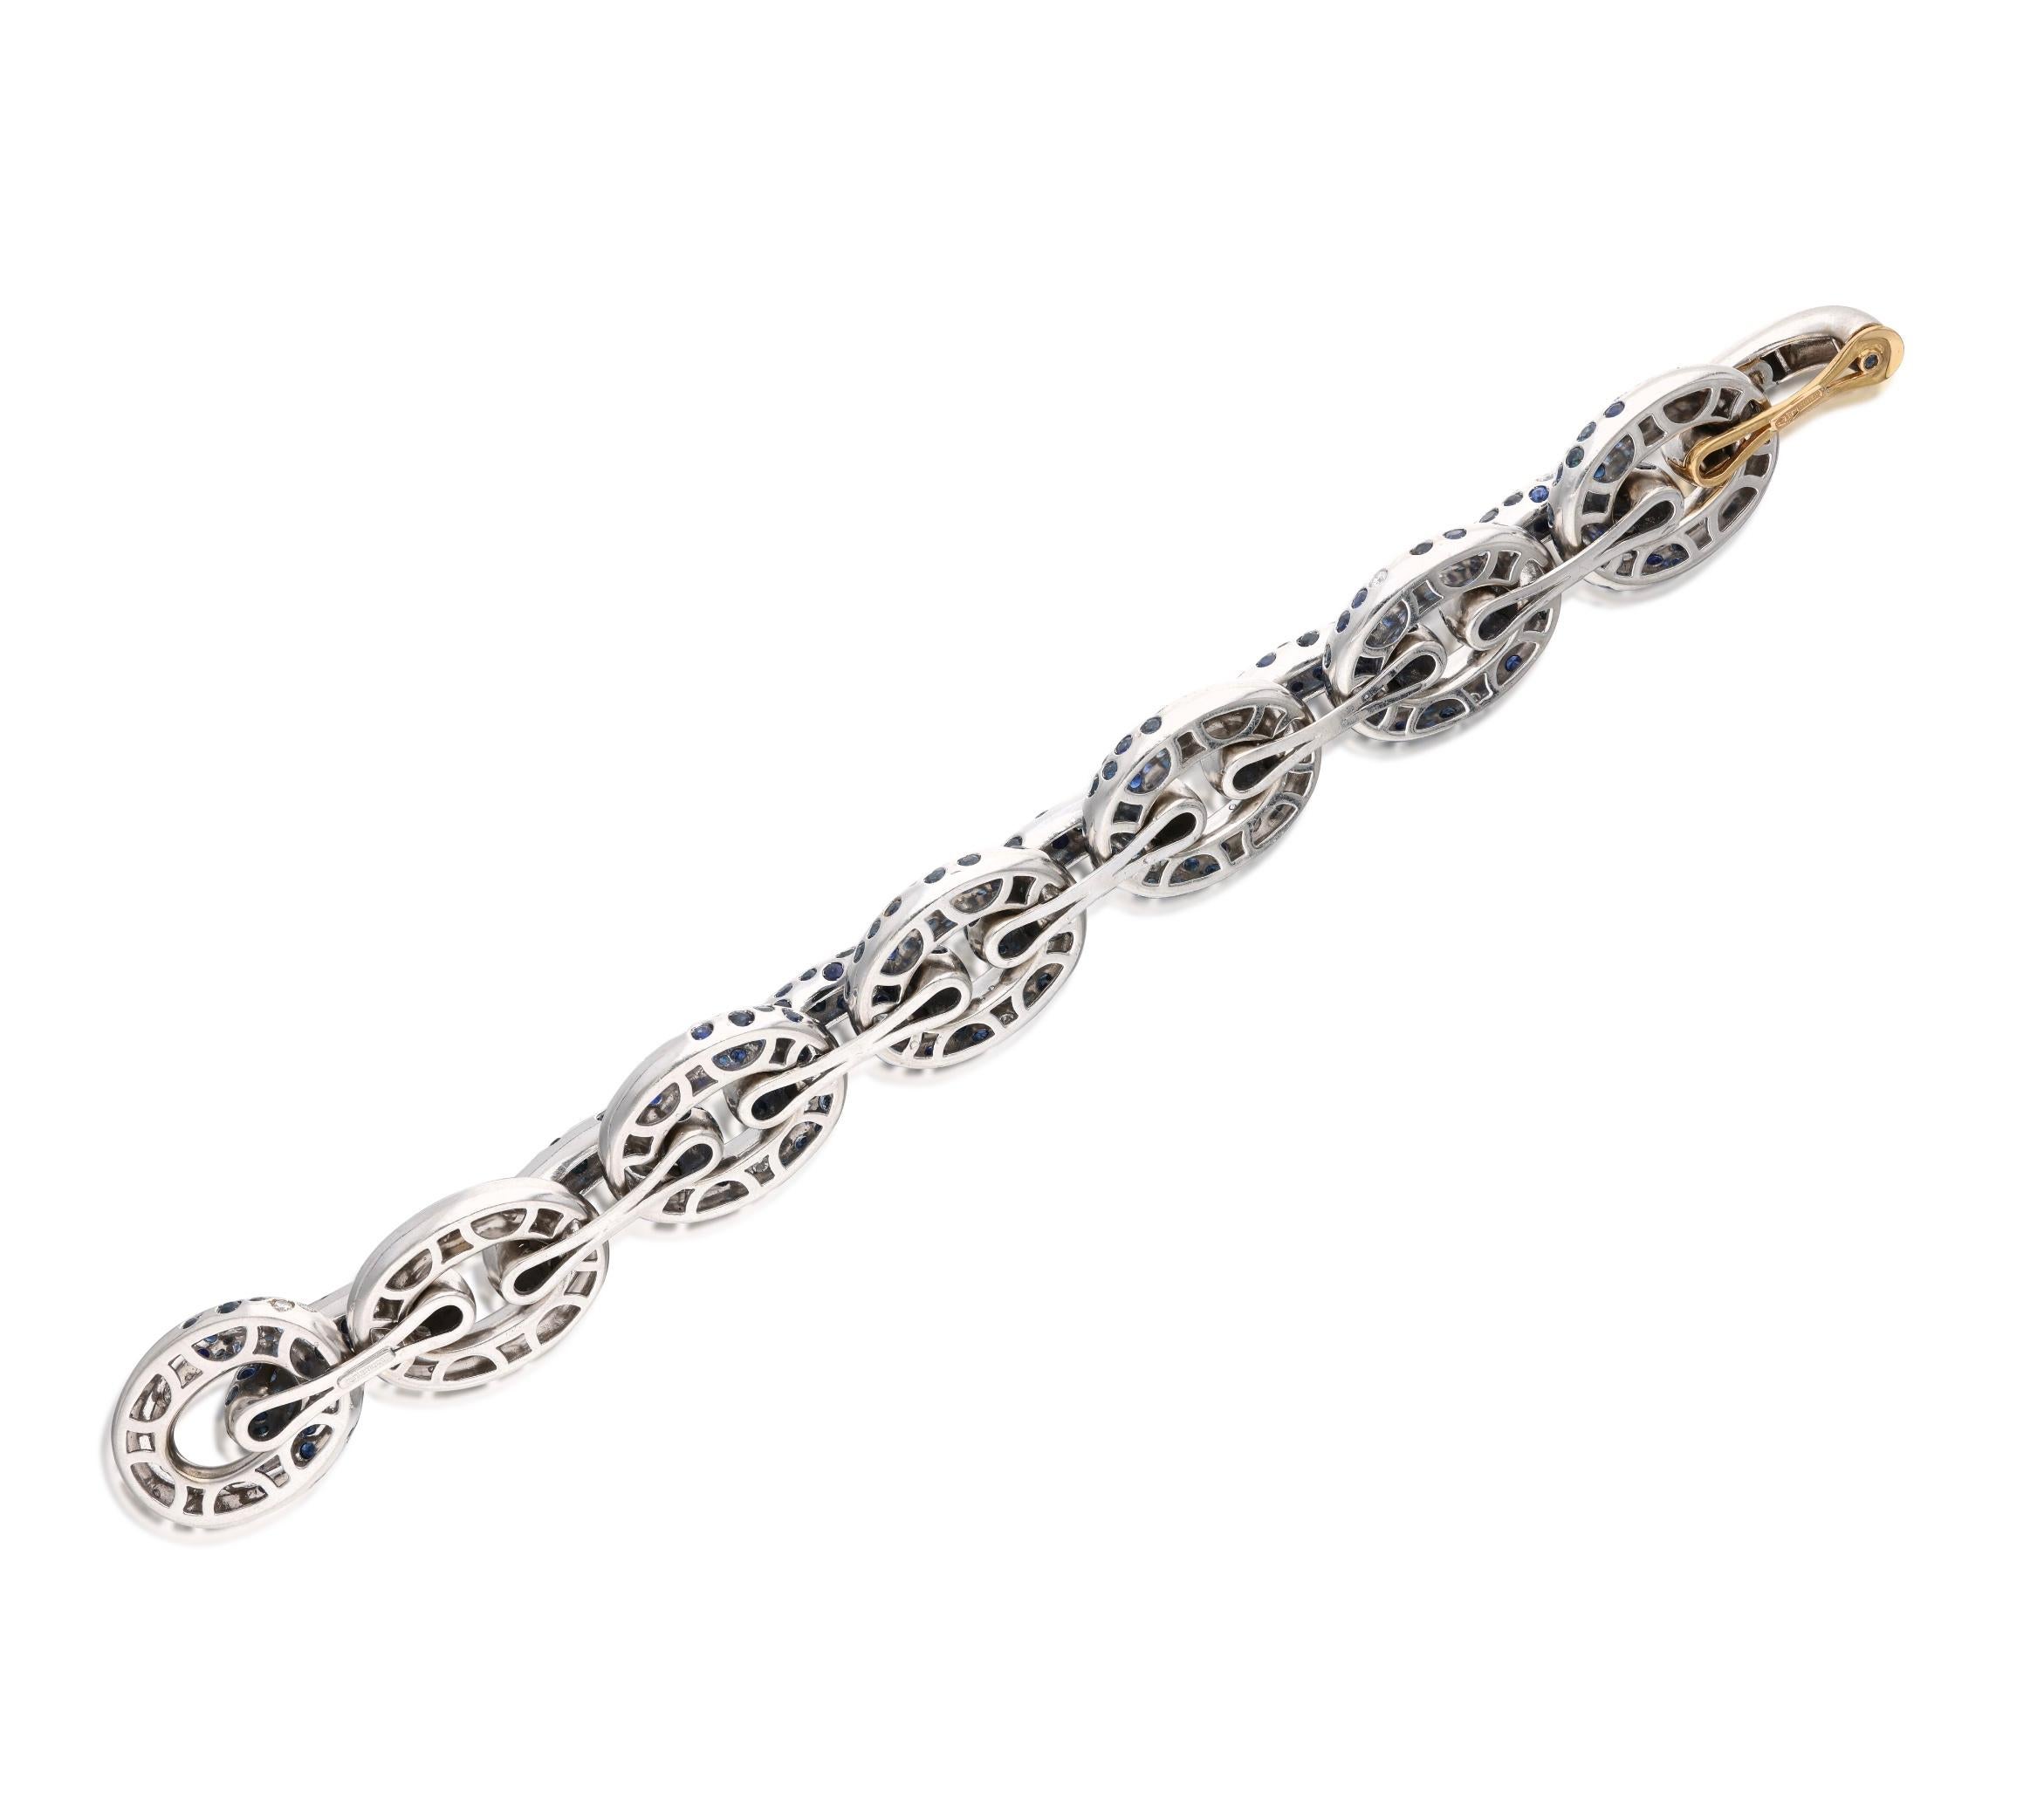 Cantamessa 18 karat white gold oval link bracelet, accented by round-cut diamonds and sapphires. The diamonds weigh a total of approximately 2.30 carats, and the sapphires weigh a total of approximately 10 carats. Marked: Cantamessa. Made in Italy.